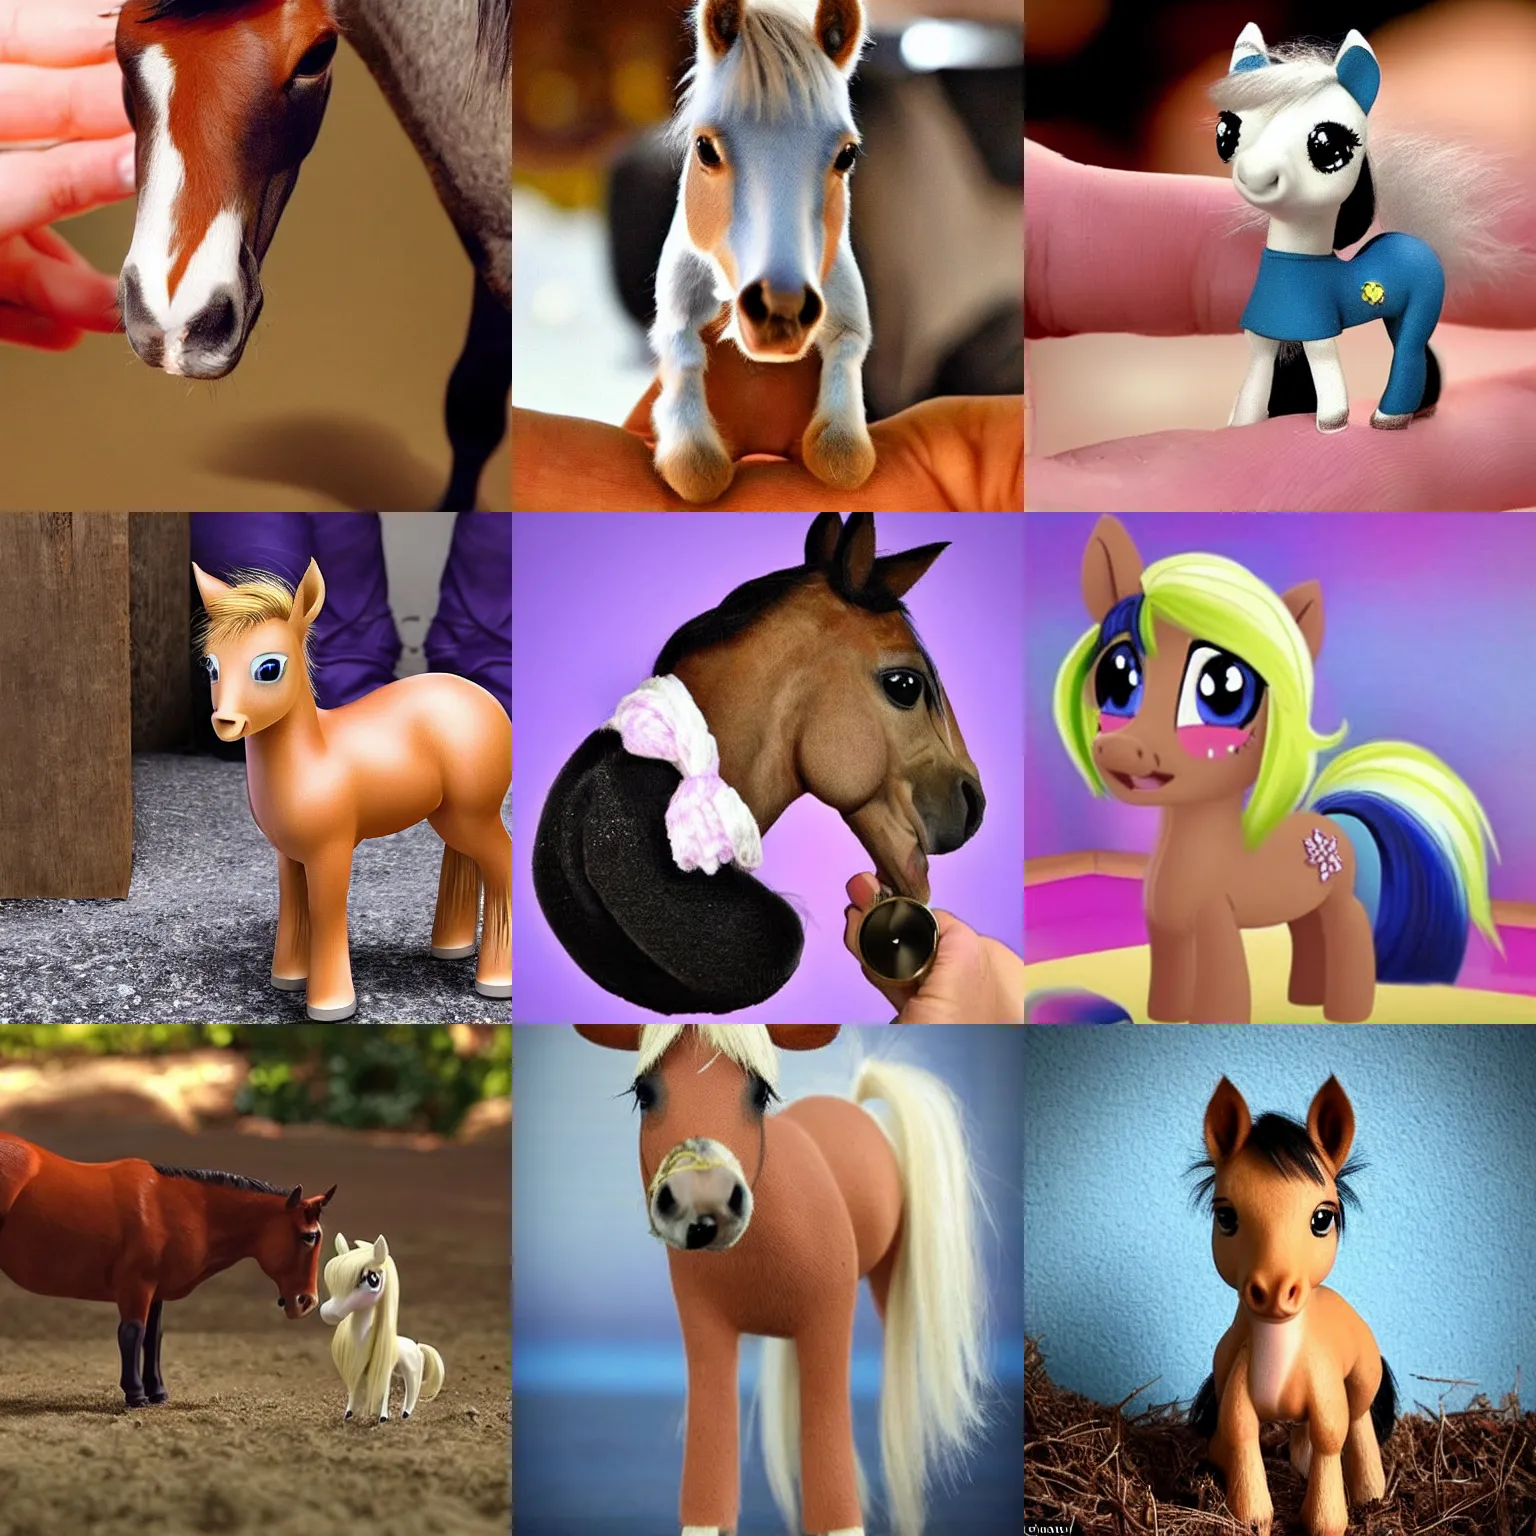 Prompt: the worlds smallest pony ever conceived starring on a reality TV show to find the cutest contestant